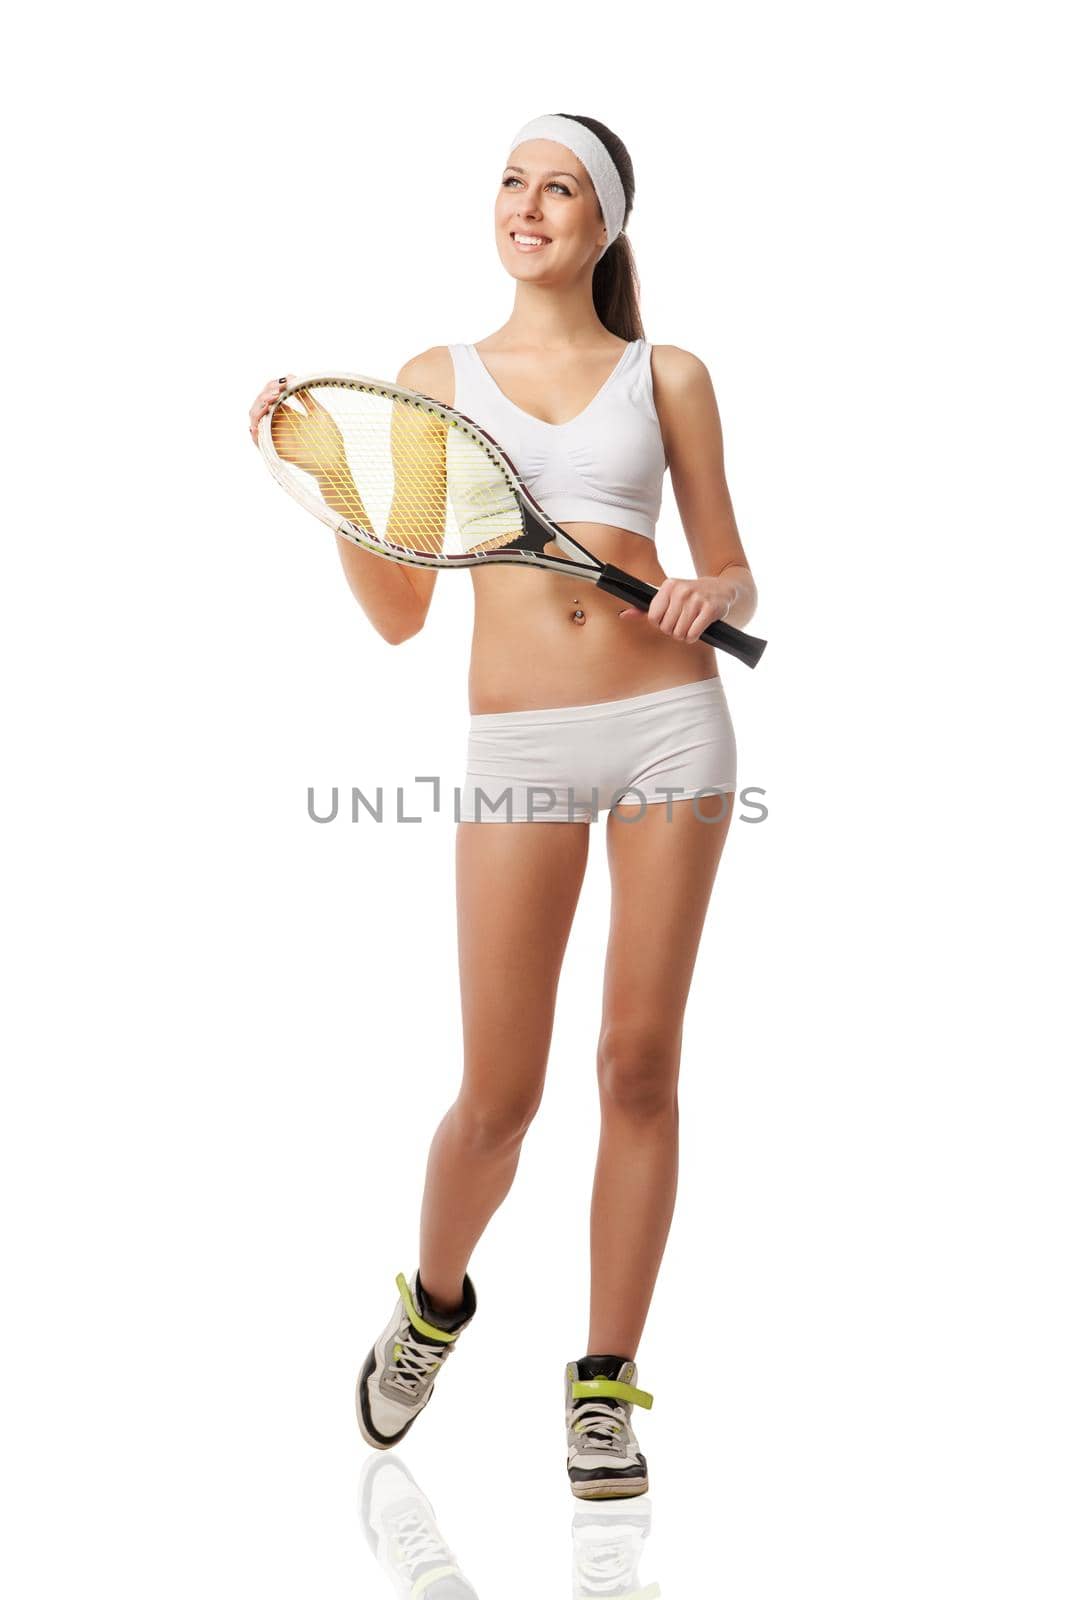 Adult woman holding a tennis racquet. Studio shot over white.